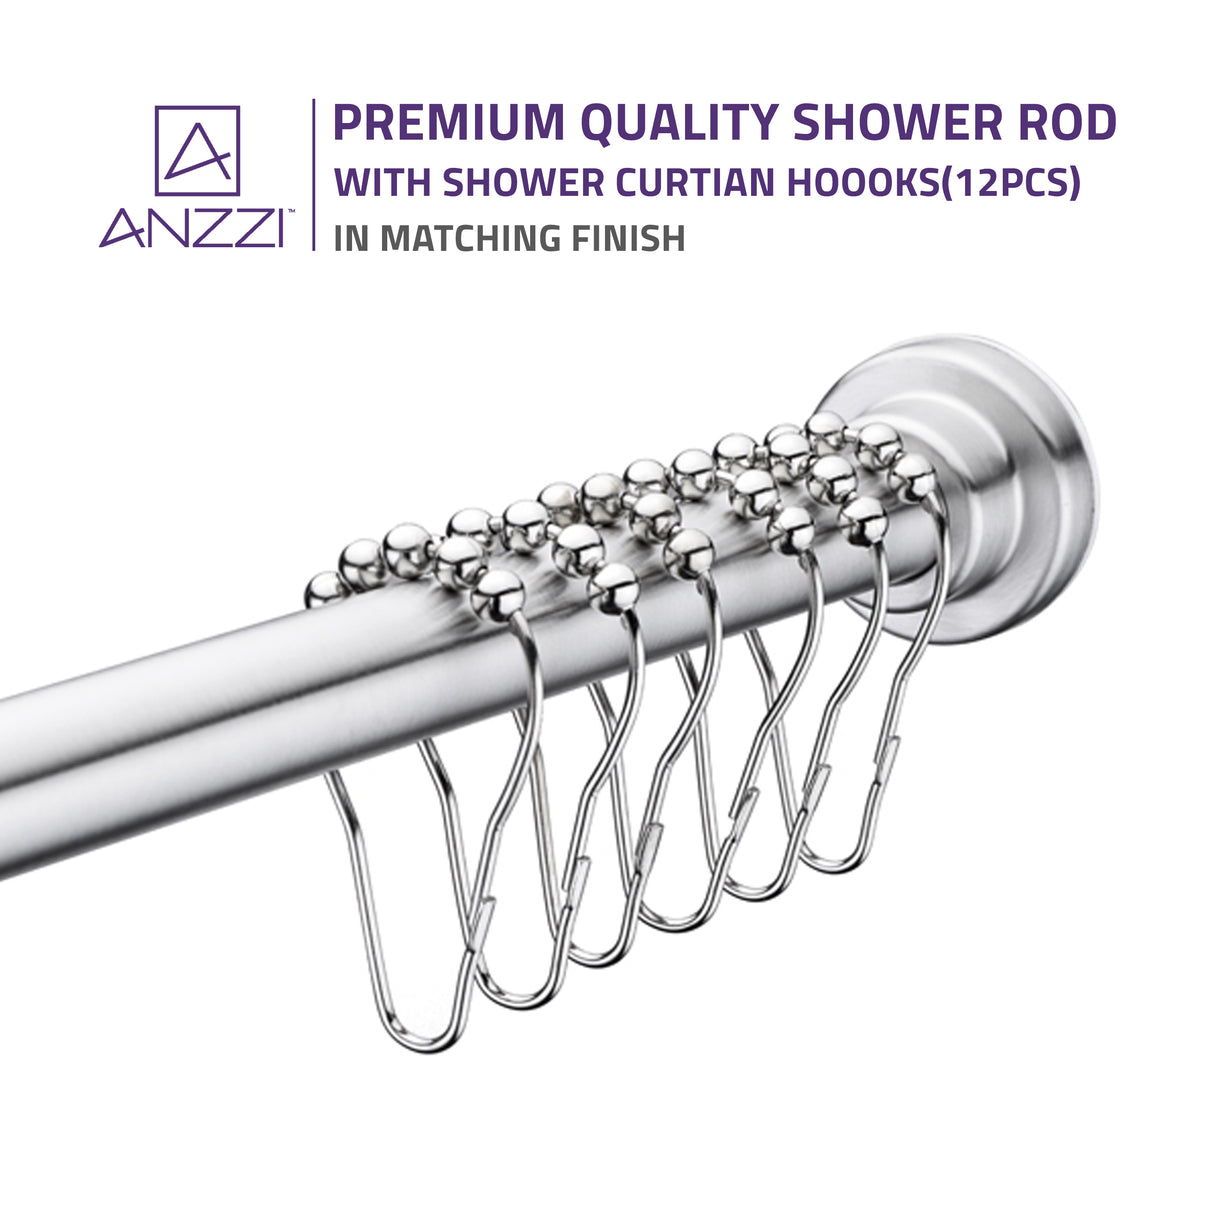 ANZZI AC-AZSR55BN 35-55 Inches Shower Curtain Rod with Shower Hooks in Brushed Nickel | Adjustable Tension Shower Doorway Curtain Rod | Rust Resistant No Drilling Anti-Slip Bar for Bathroom | AC-AZSR55BN